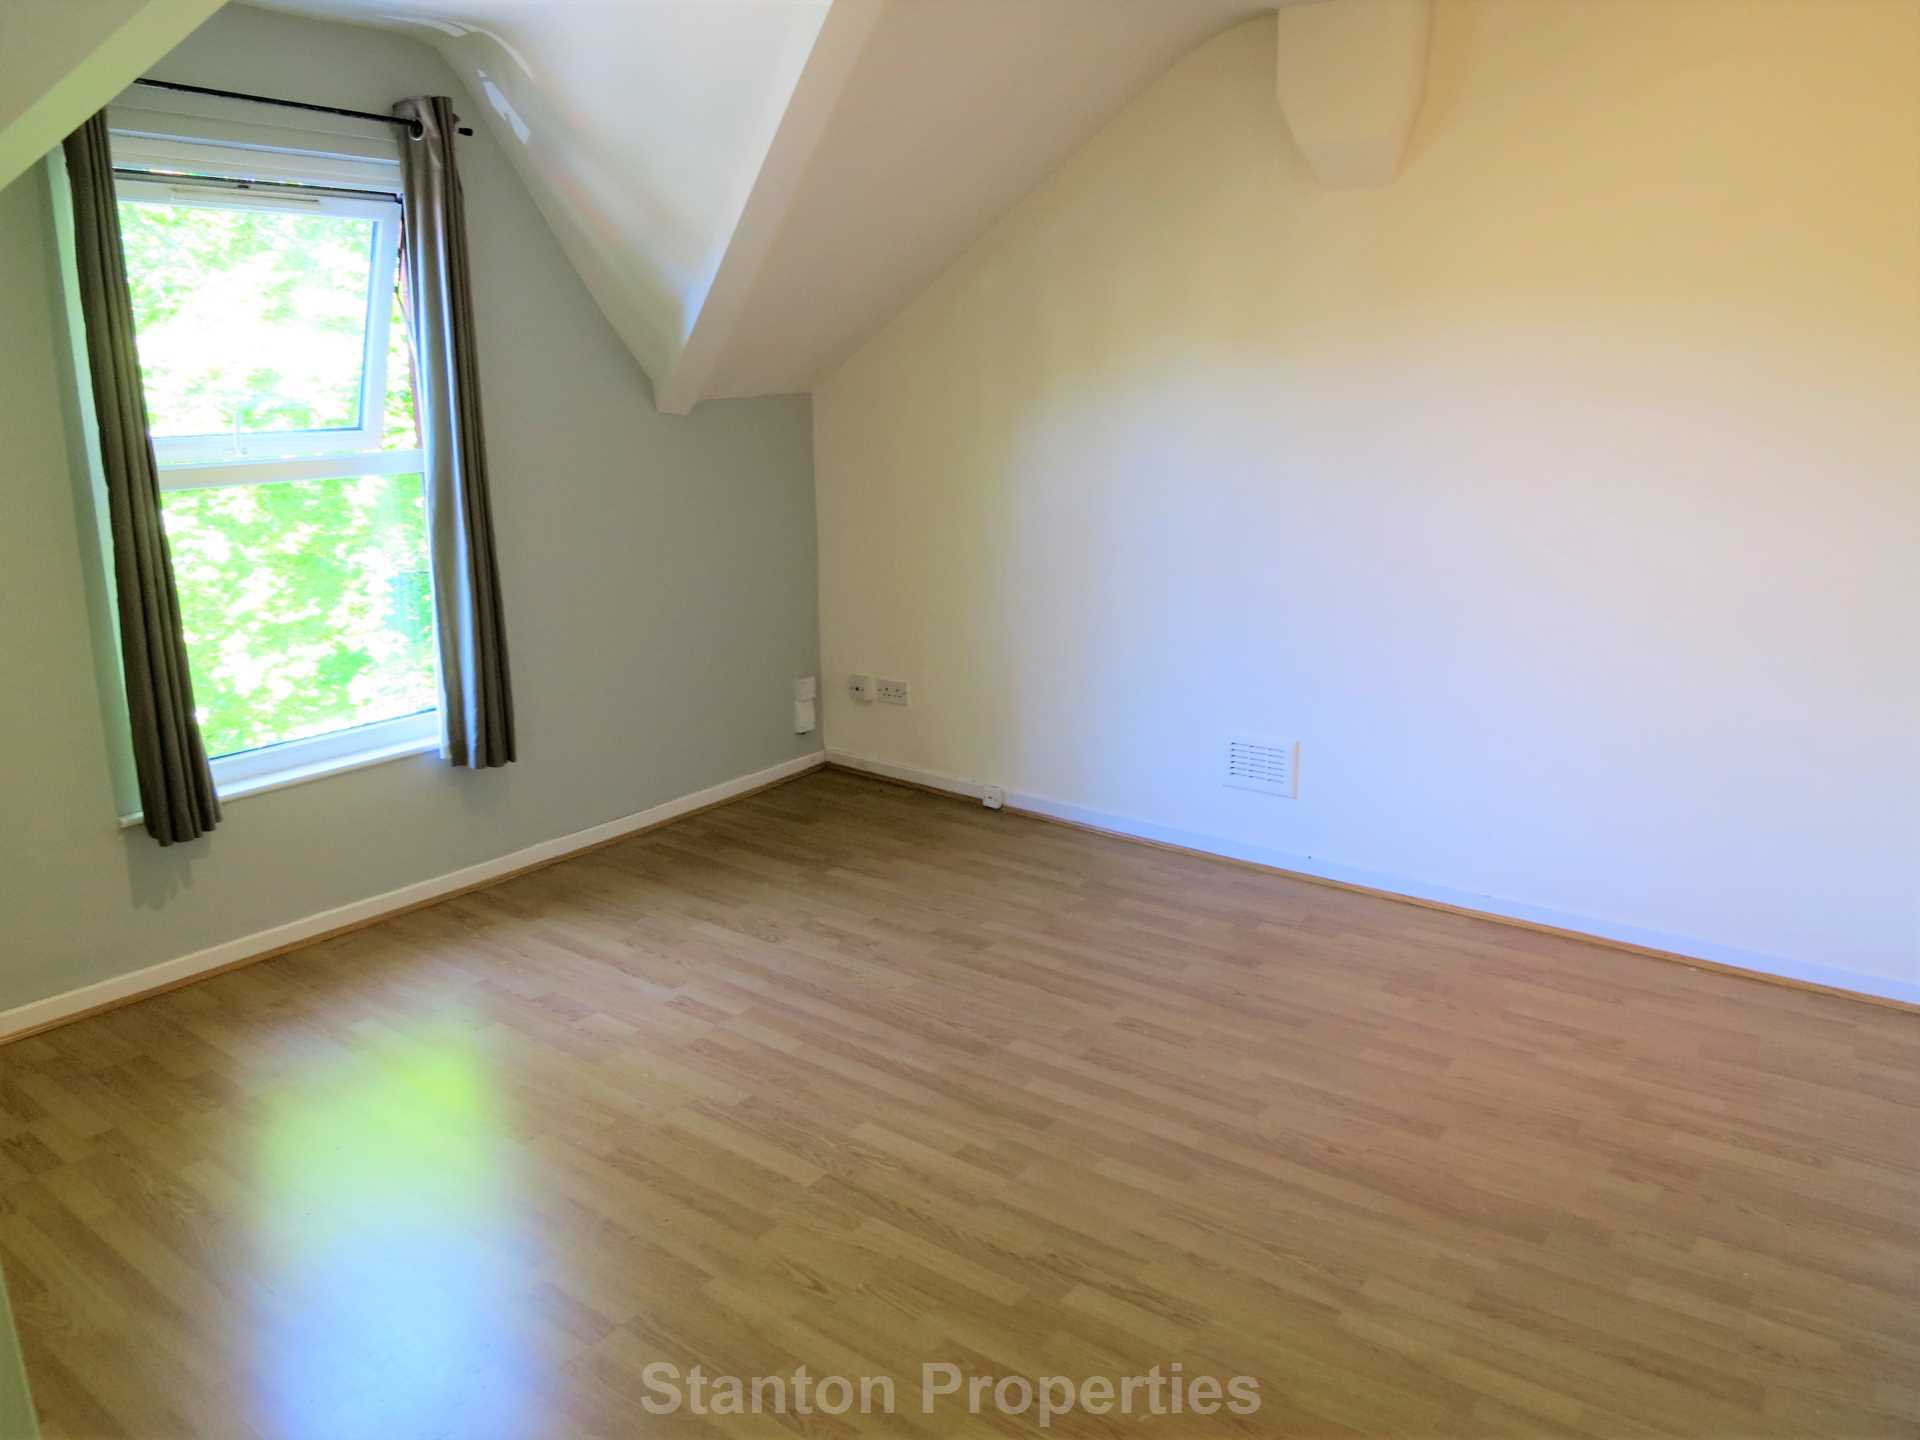 1 bed Apartment for rent in Gatley. From Stanton Properties